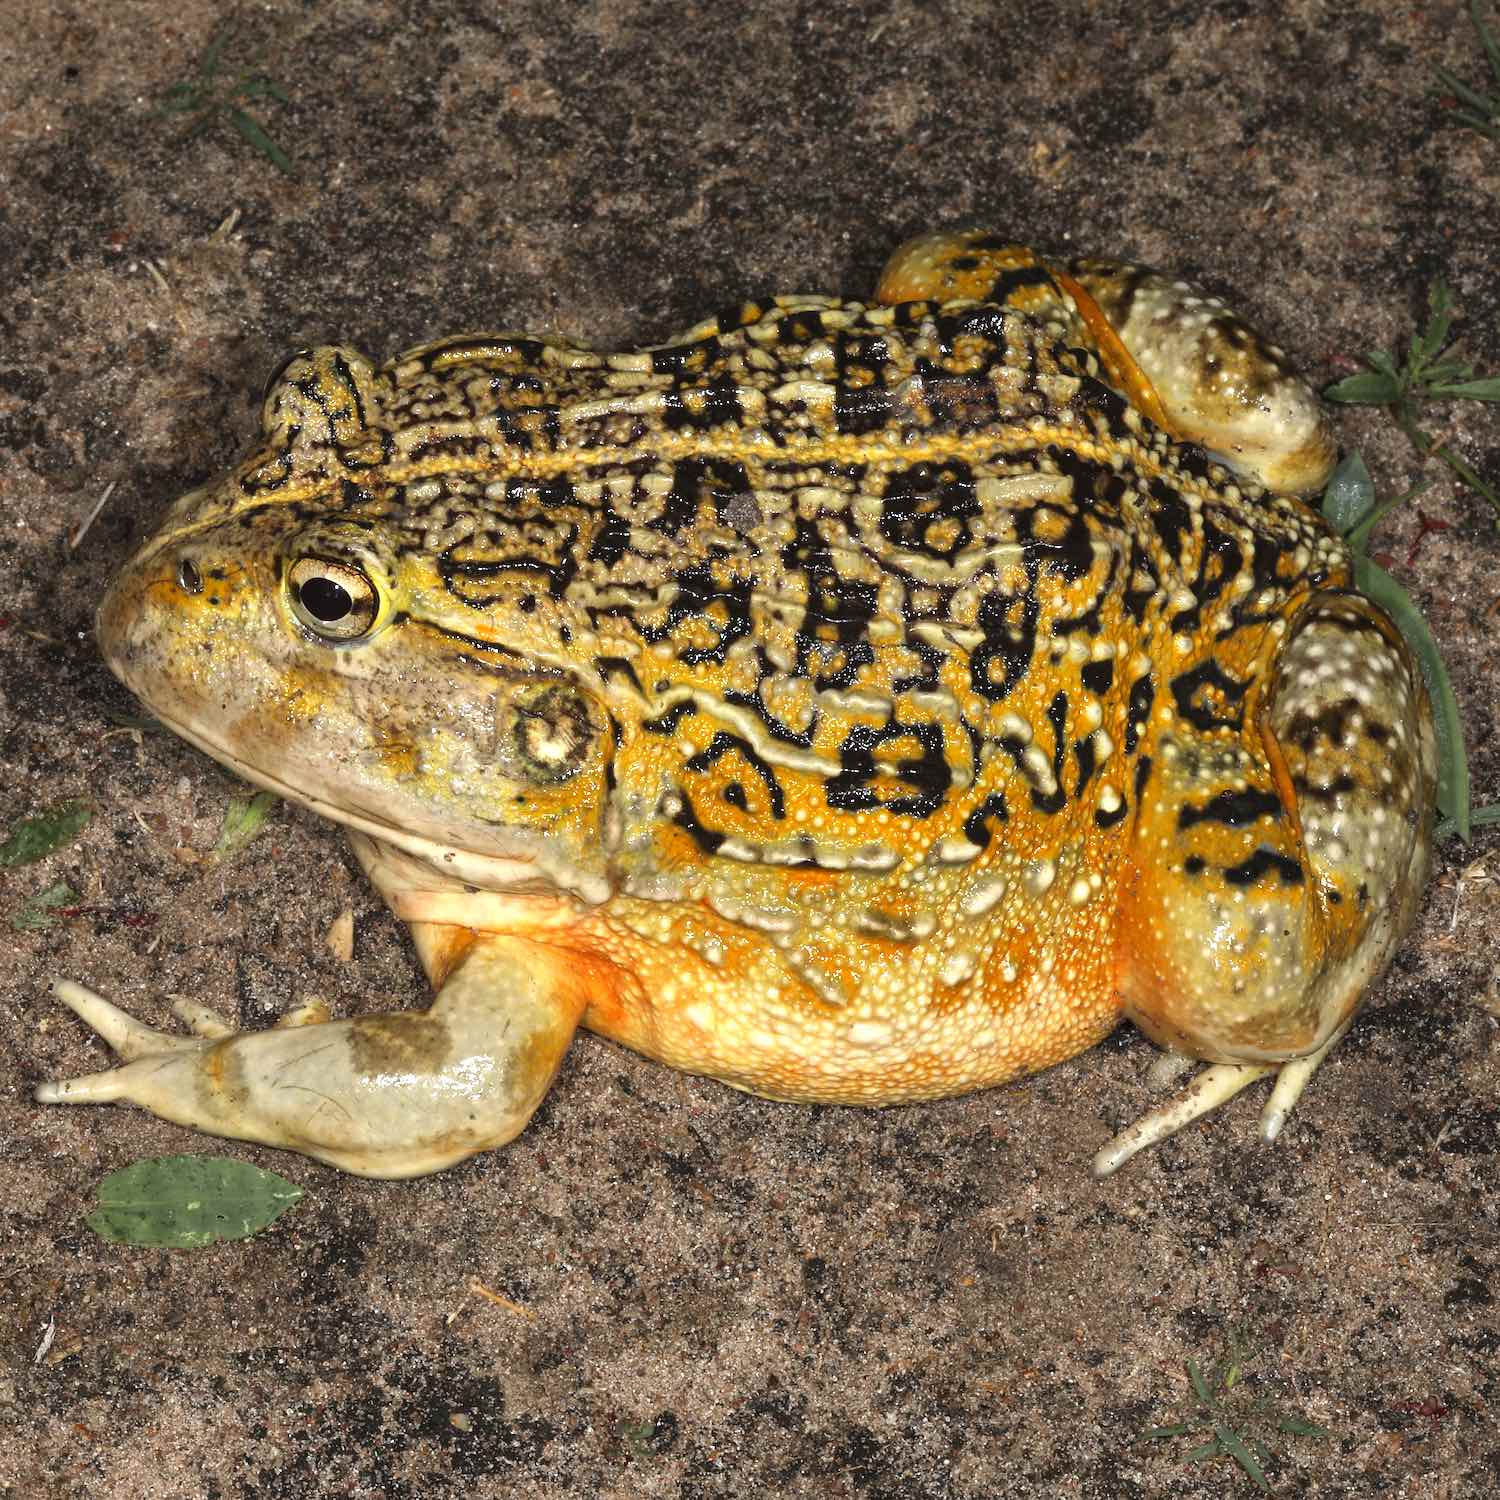 Top view of a black, yellow and orange Beytell's bullfrog.